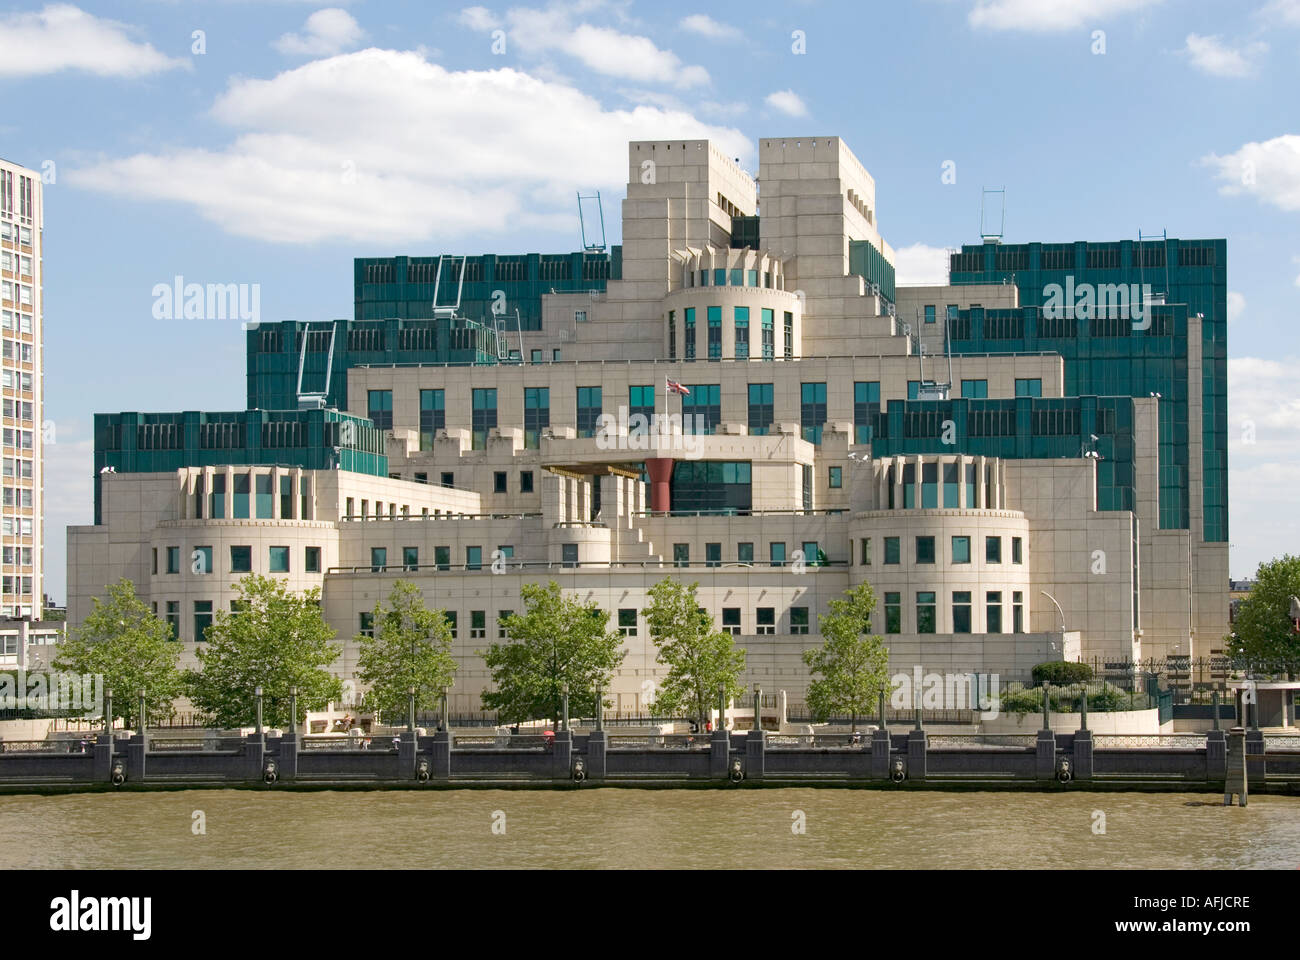 River Thames & modern architecture riverside Mi6 building at Vauxhall Cross the HQ of the Government Secret Intelligence Service SIS London England UK Stock Photo